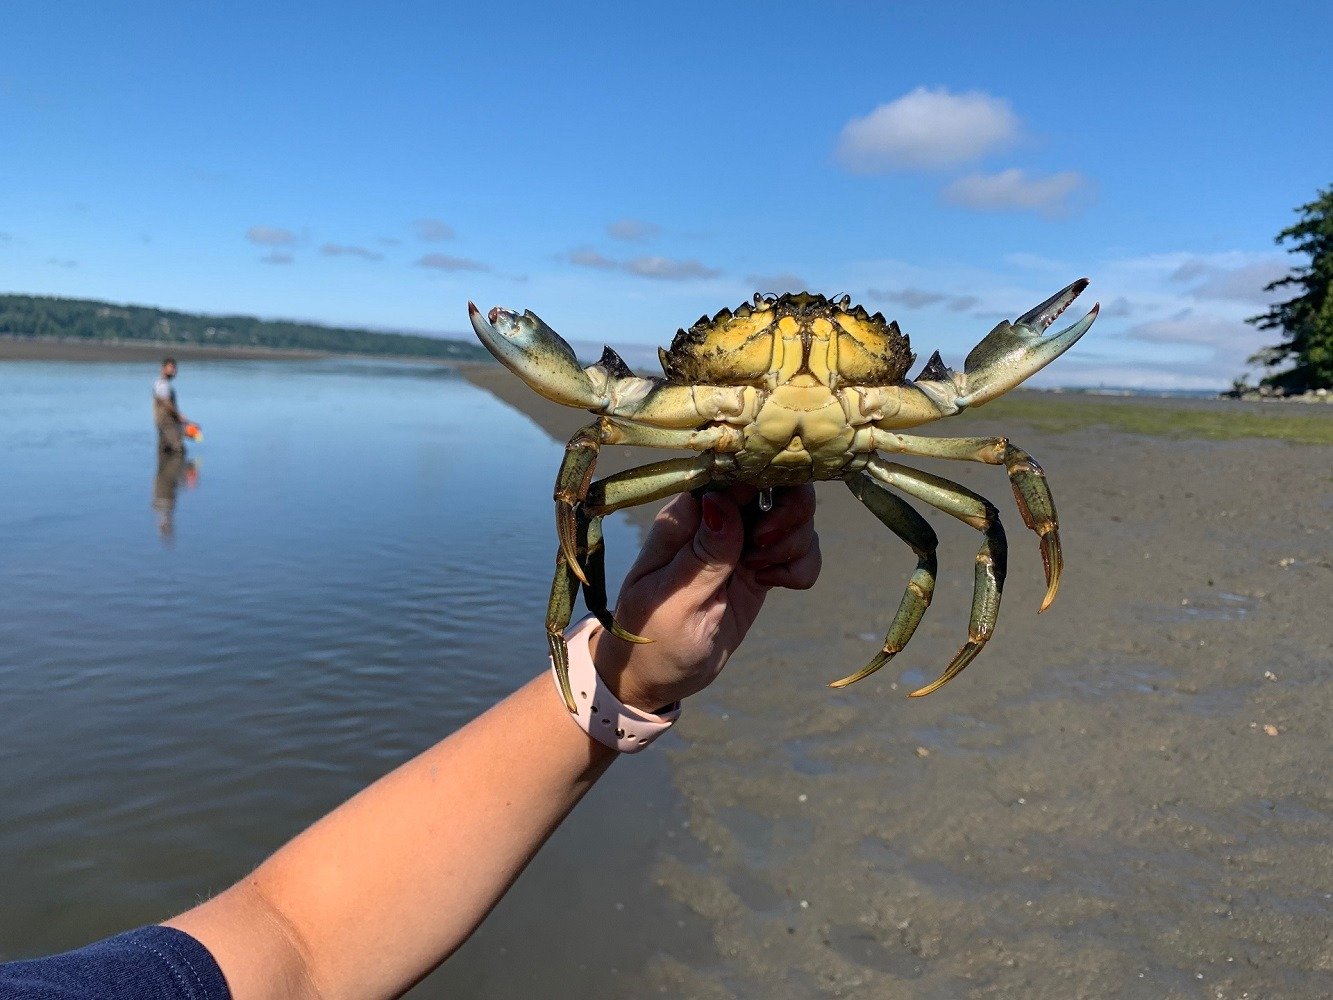 Emergency Measures Deployed for Invasive Green Crabs